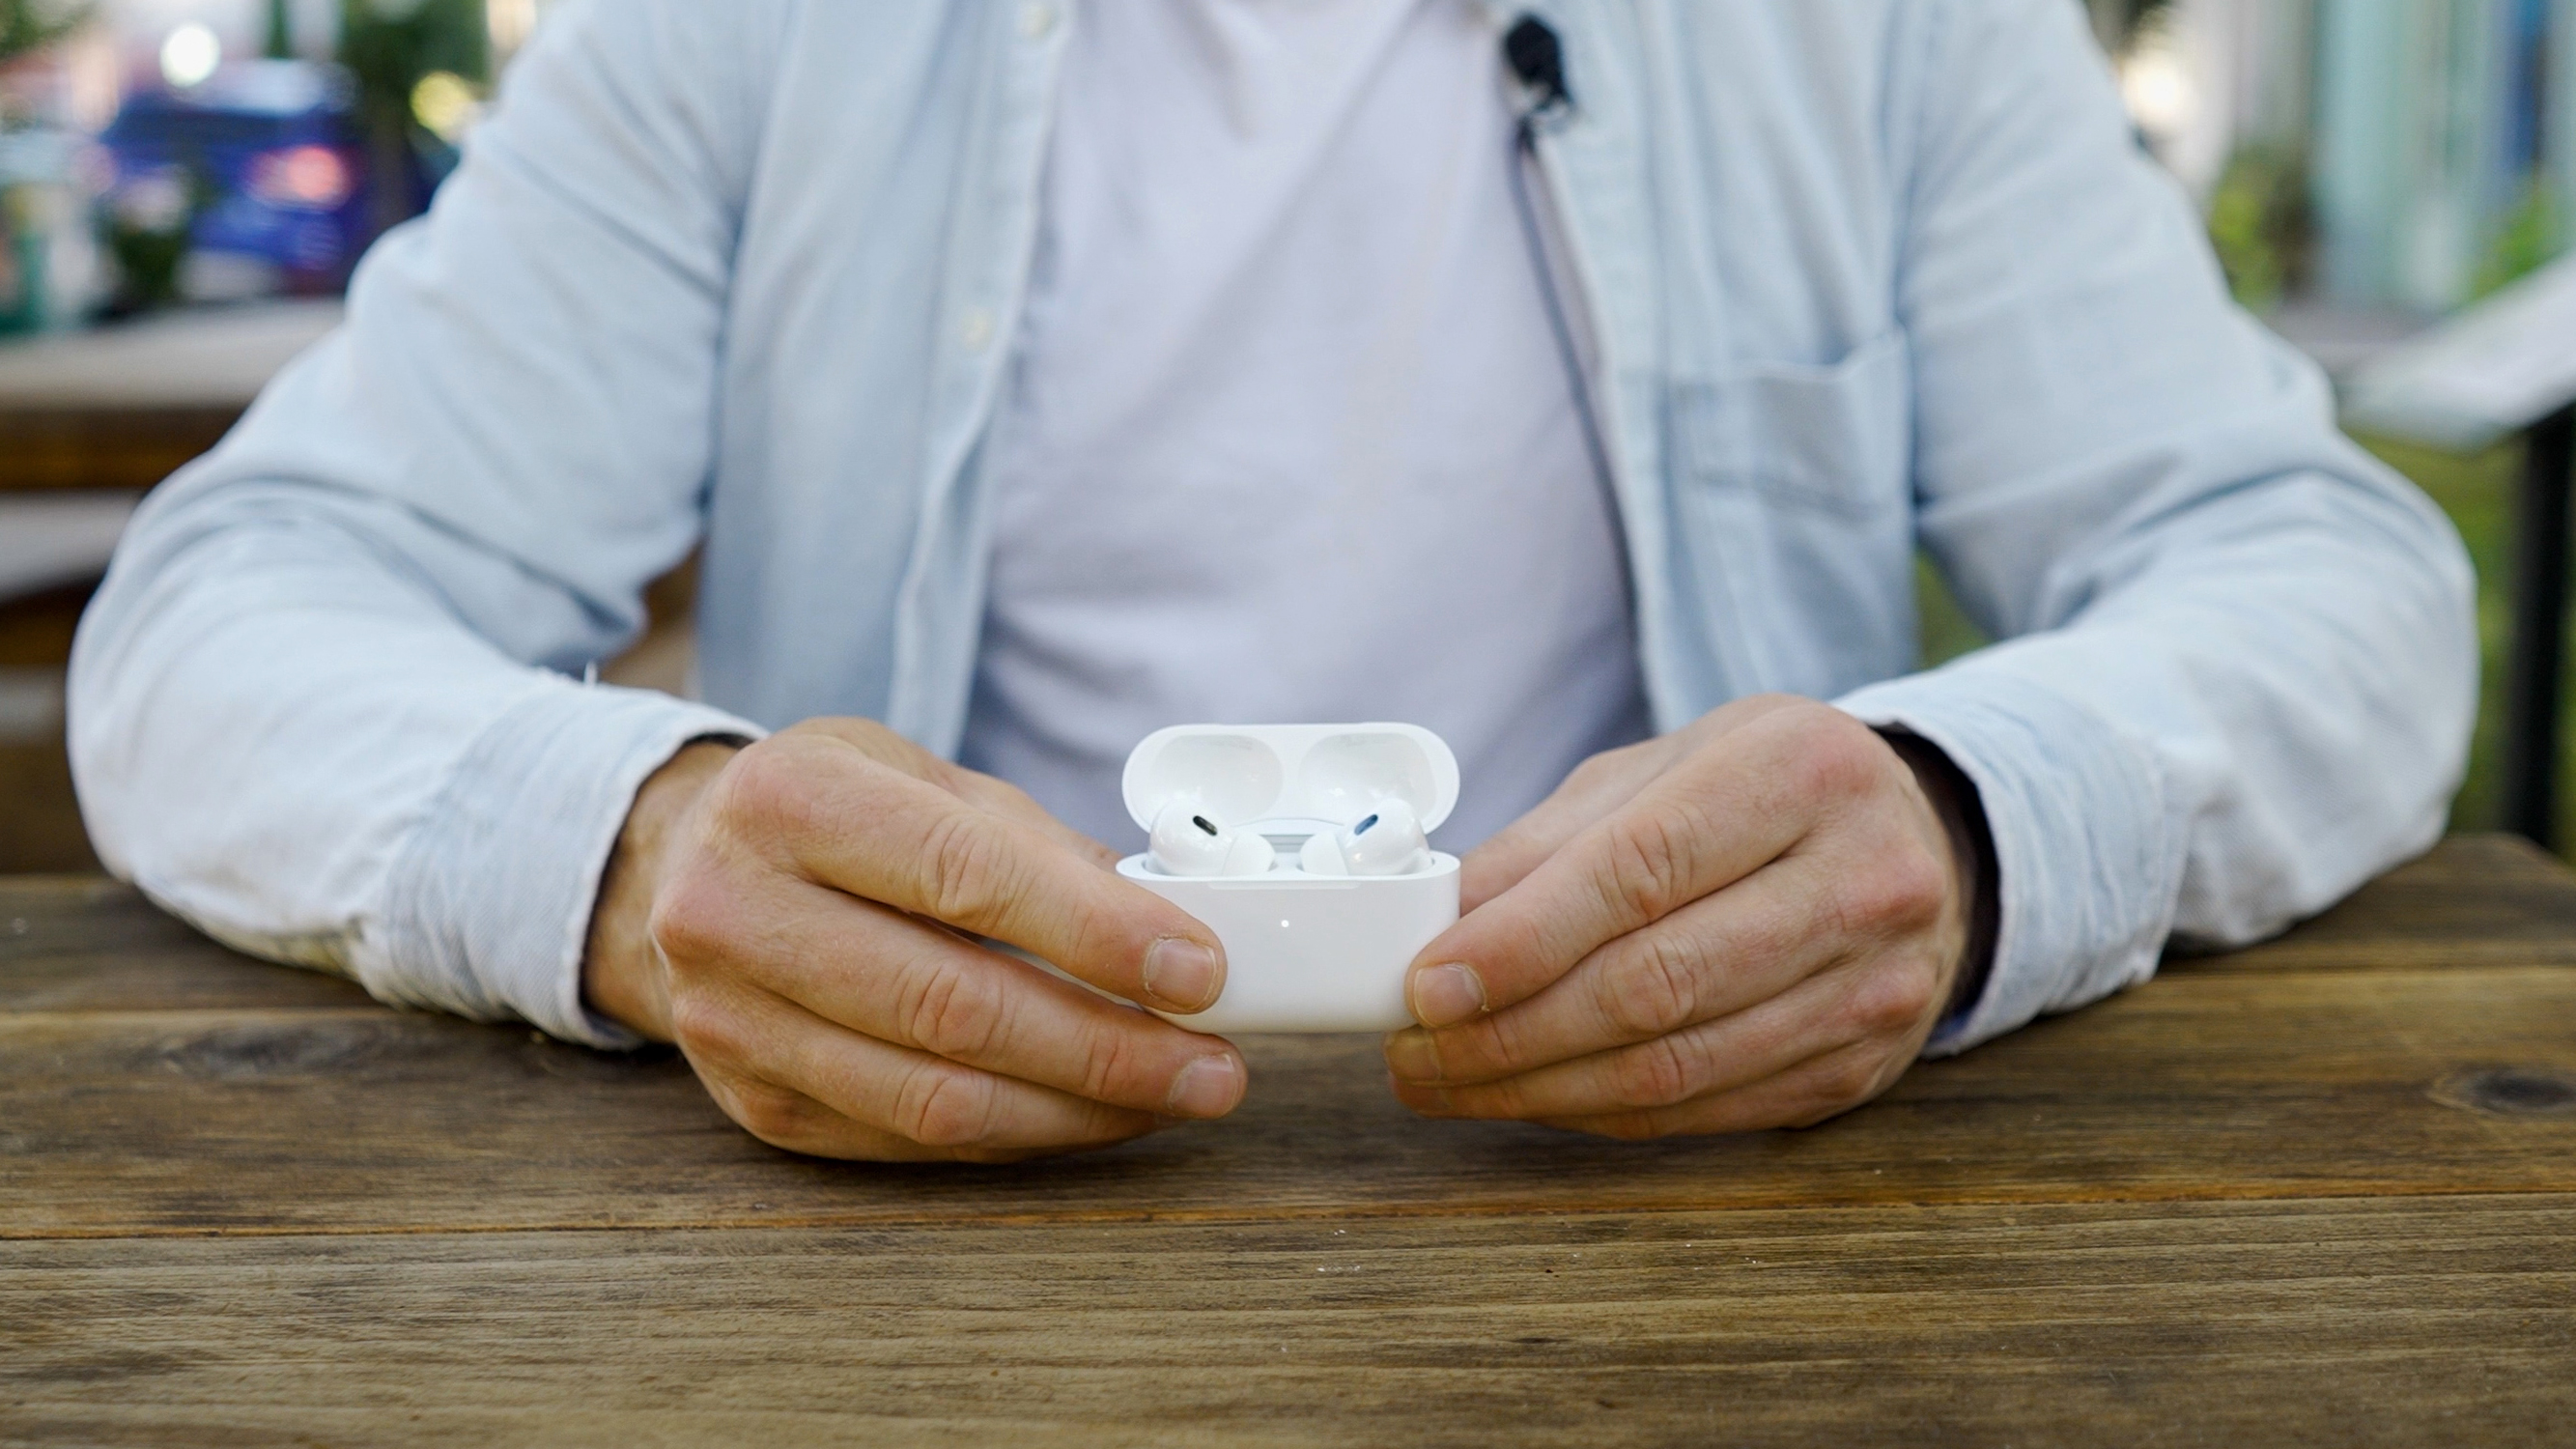 Apple AirPods Pro 2 with USB-C and MagSafe review | Digital Trends